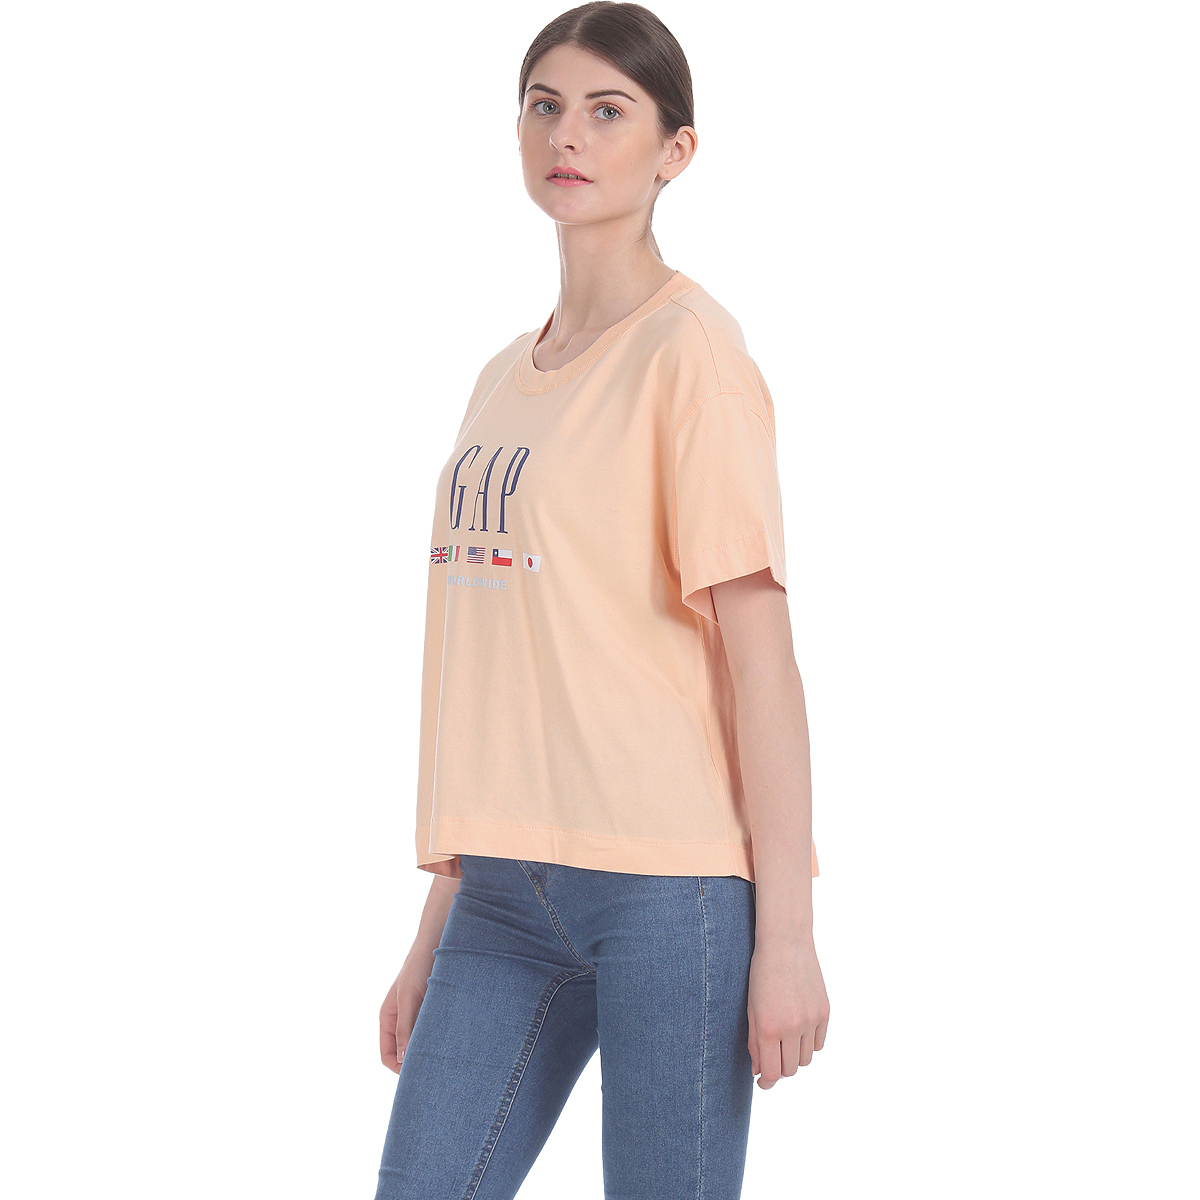 Gap Solid Color Boxy Fit Drop Shoulder T-Shirt Styled with Cropped Hem & Logo-Flag Graphic Print - Peach